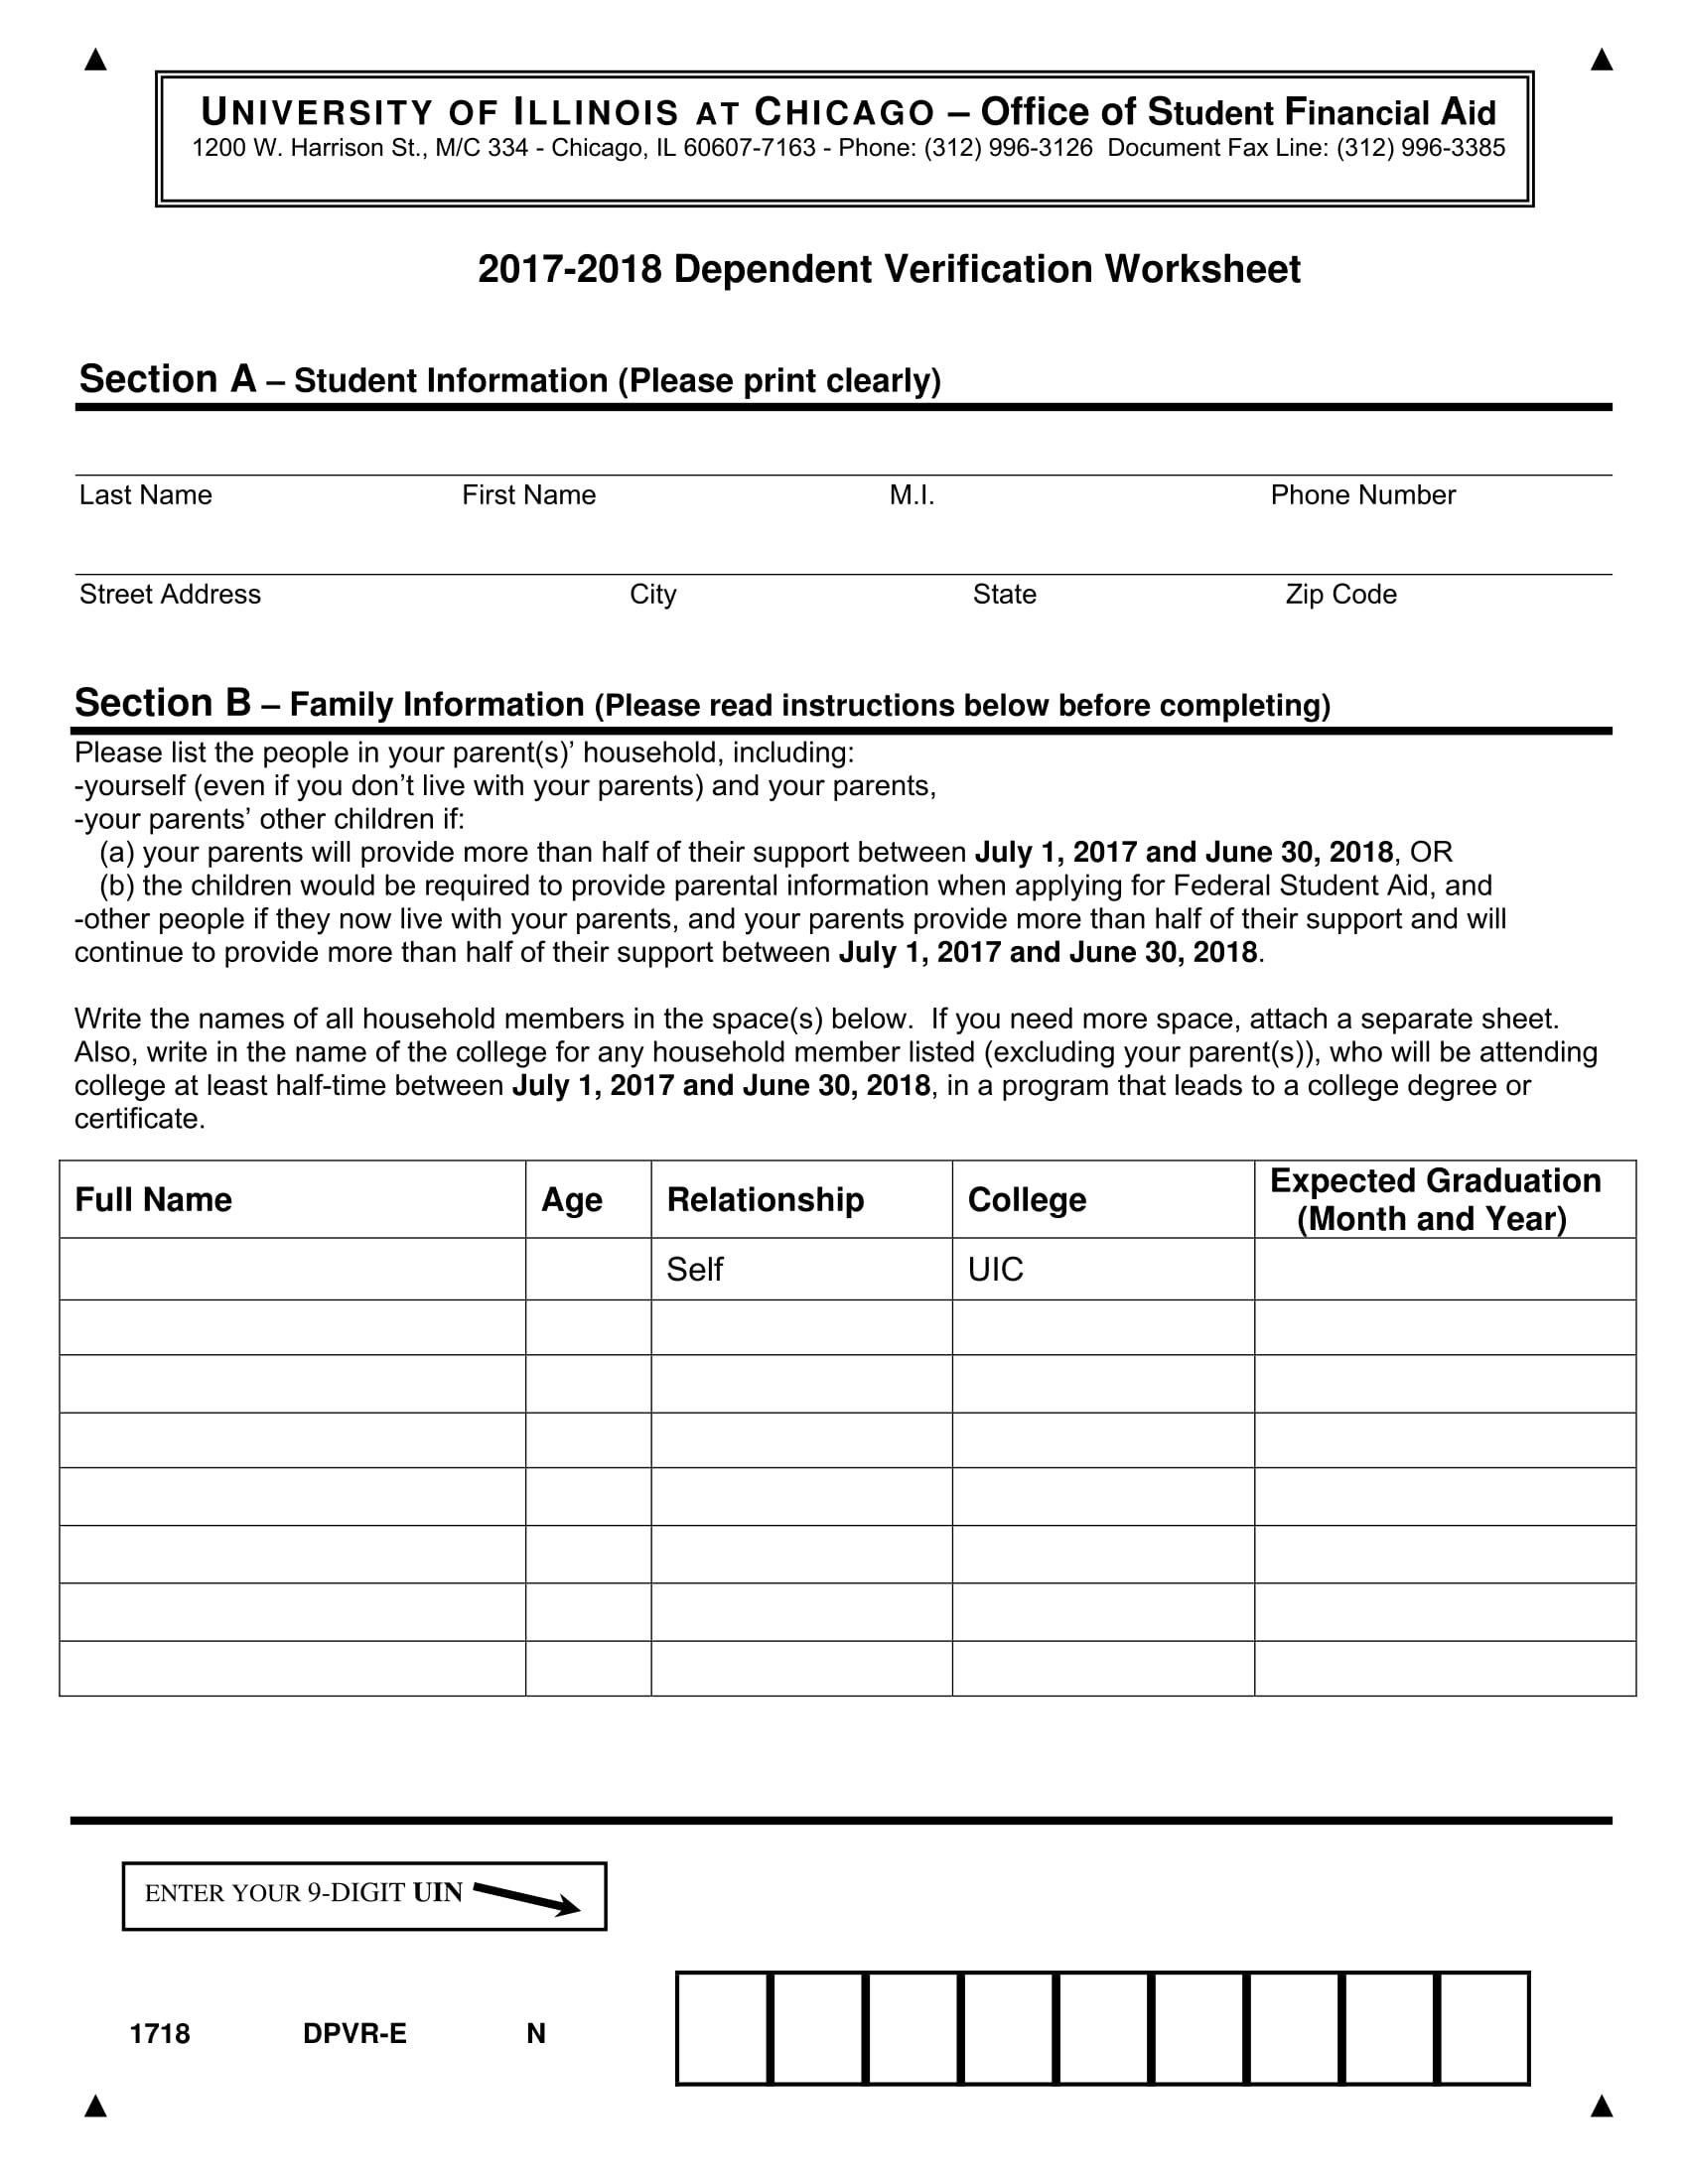 student financial aid dependent verification form 2